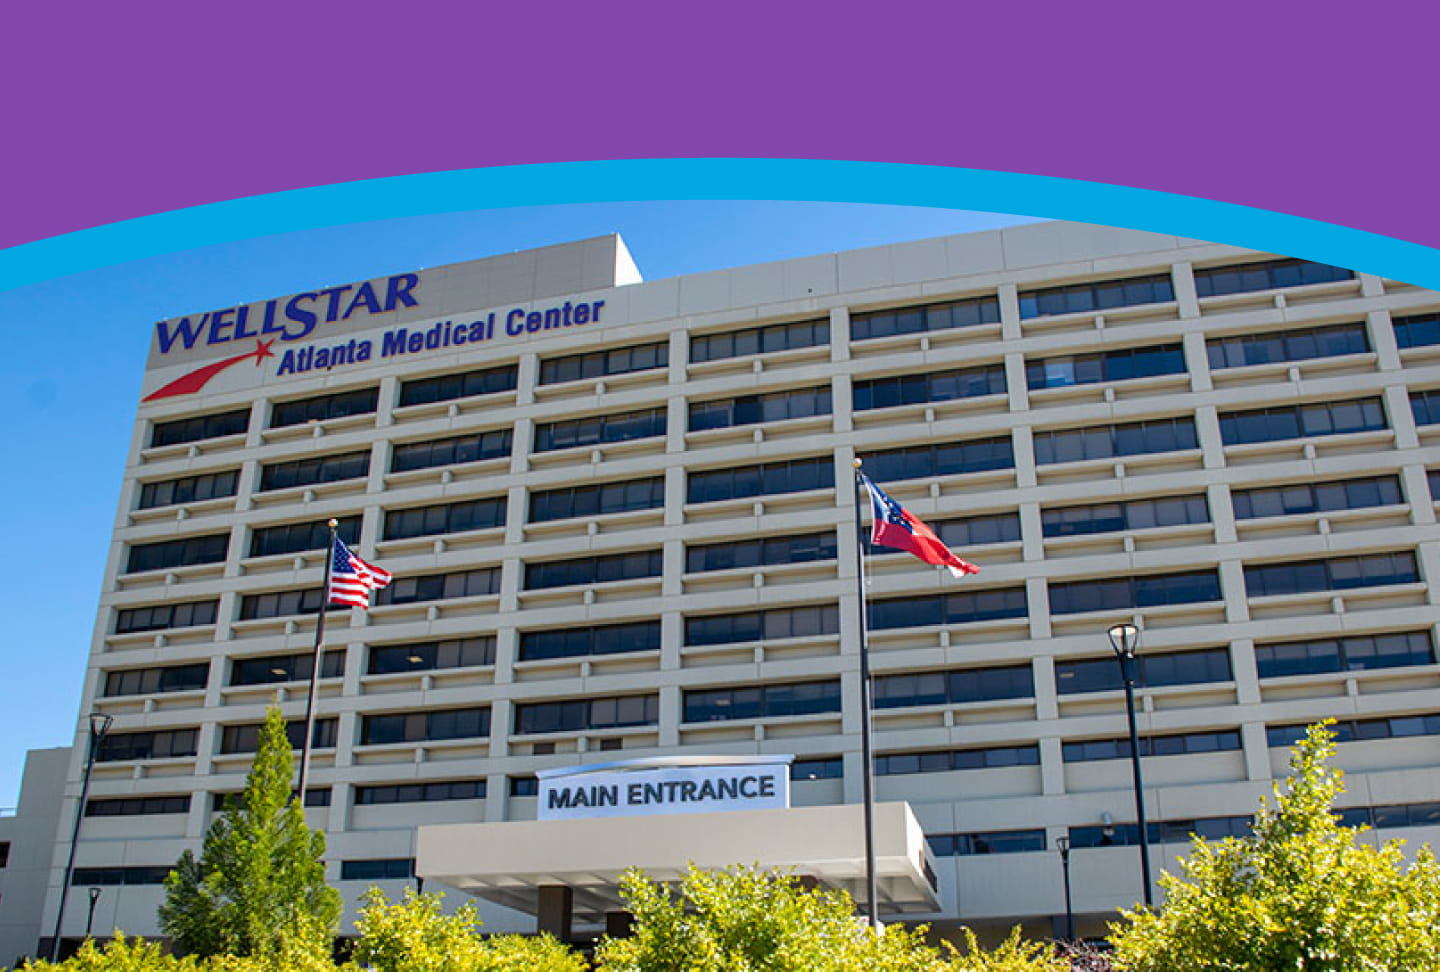 Wellstar Expands Discussion To Identify A Long-Term Solution For Critical Healthcare In Atlanta Medical Center Communities Image